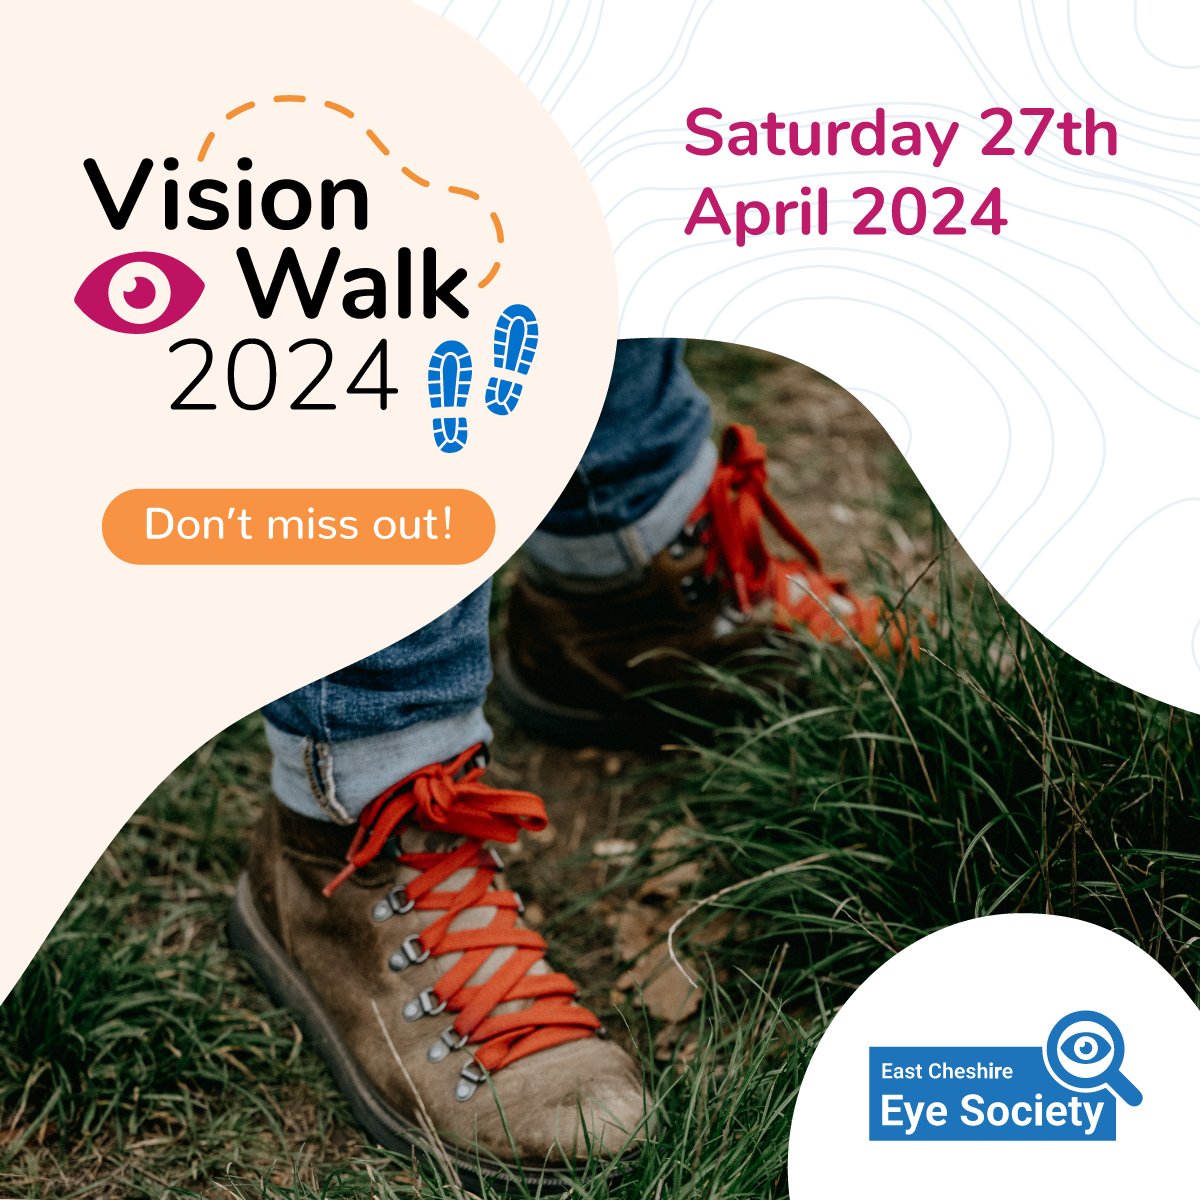 Vision Walk 2024 is next week – here’s what you need to know! Date: Saturday 27th April 2024 Time: 10-10:30am Meeting point: 11 Market Place, Macclesfield, Cheshire, SK10 1EB To get involved, just click here: ecs.page.link/wbpSQ #VisionWalk2024 #Cheshire #Macclesfield